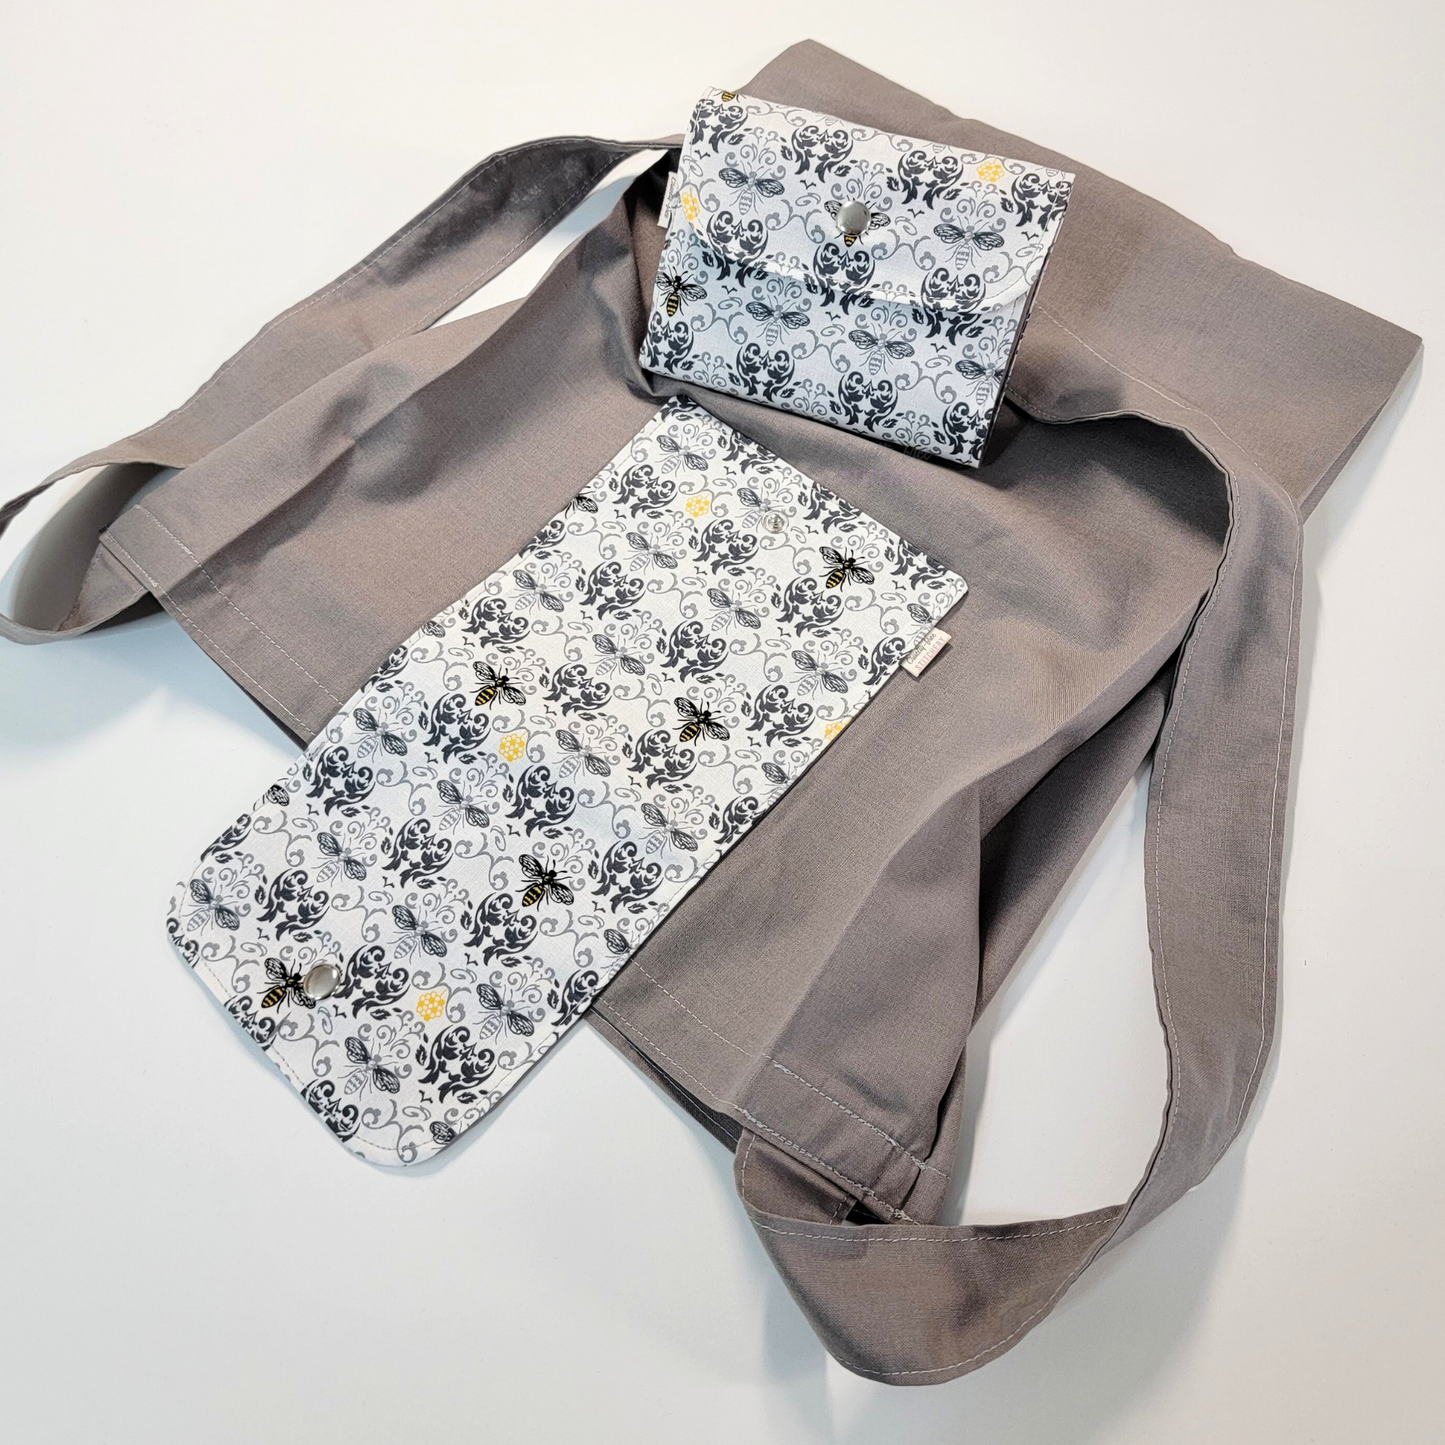 A solid neutral gray tote bag with a long strap and a black and white damask print with small bees and honeycombs on the flap. On top of the bag is another bag that has been folded up and snapped together like a wallet.